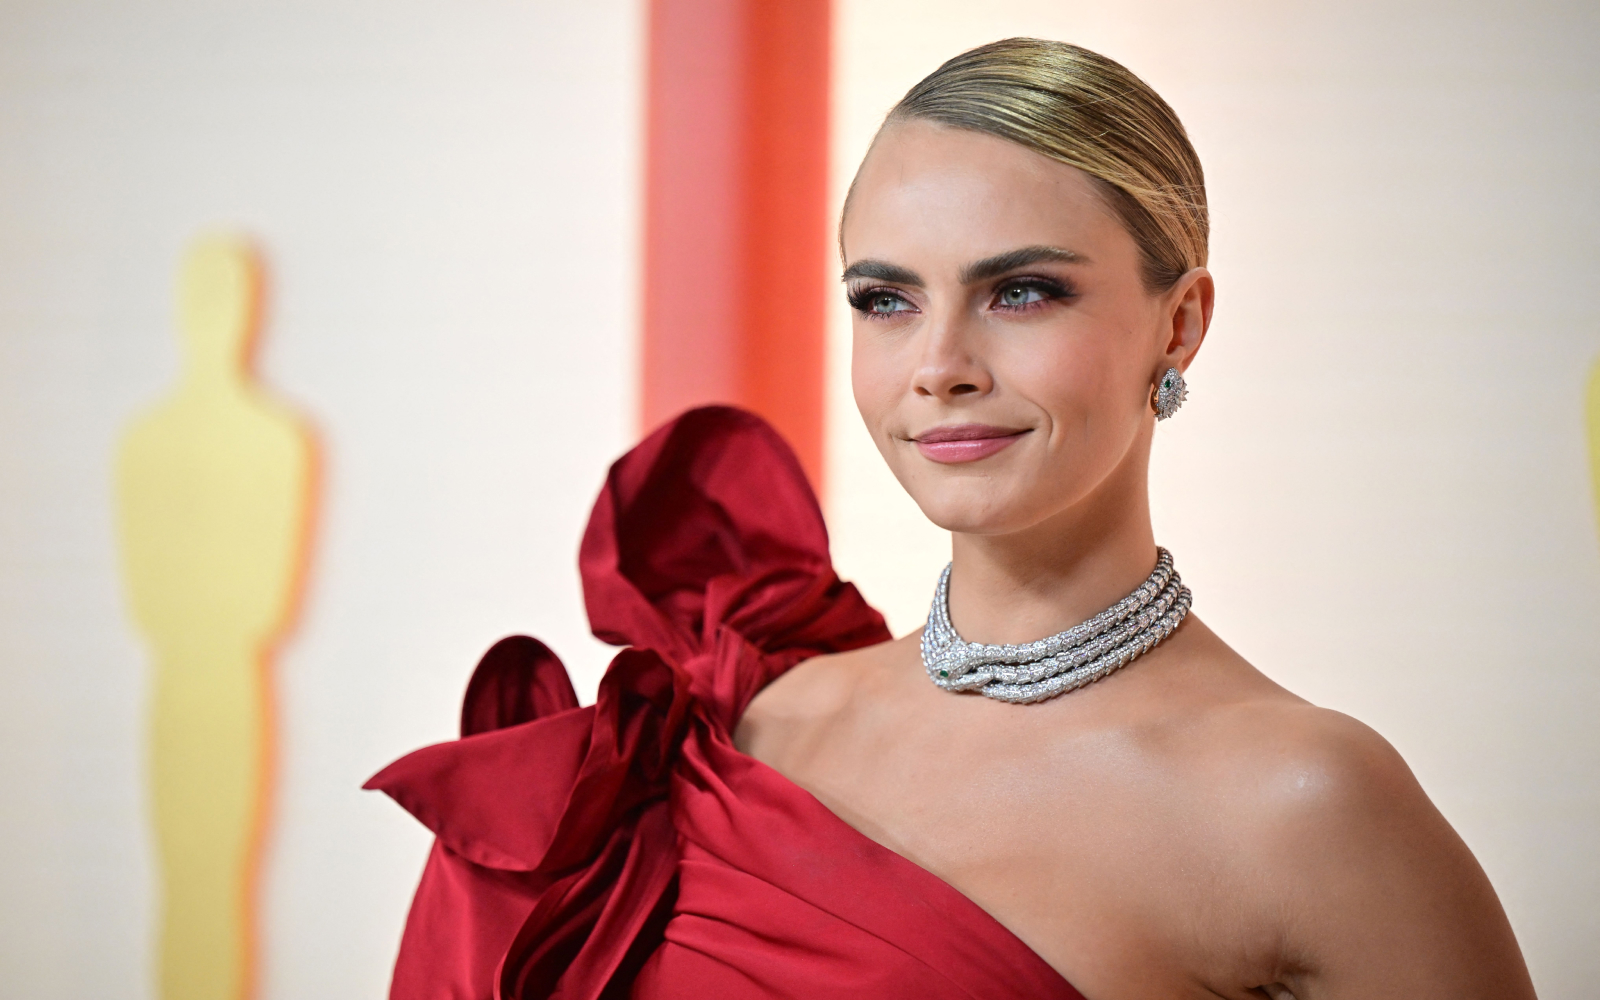 Cara Delevingne at the Academy Awards wearing a suite of Bulgari Serpenti jewels, including a 4.55-carat oval-shaped emerald ring